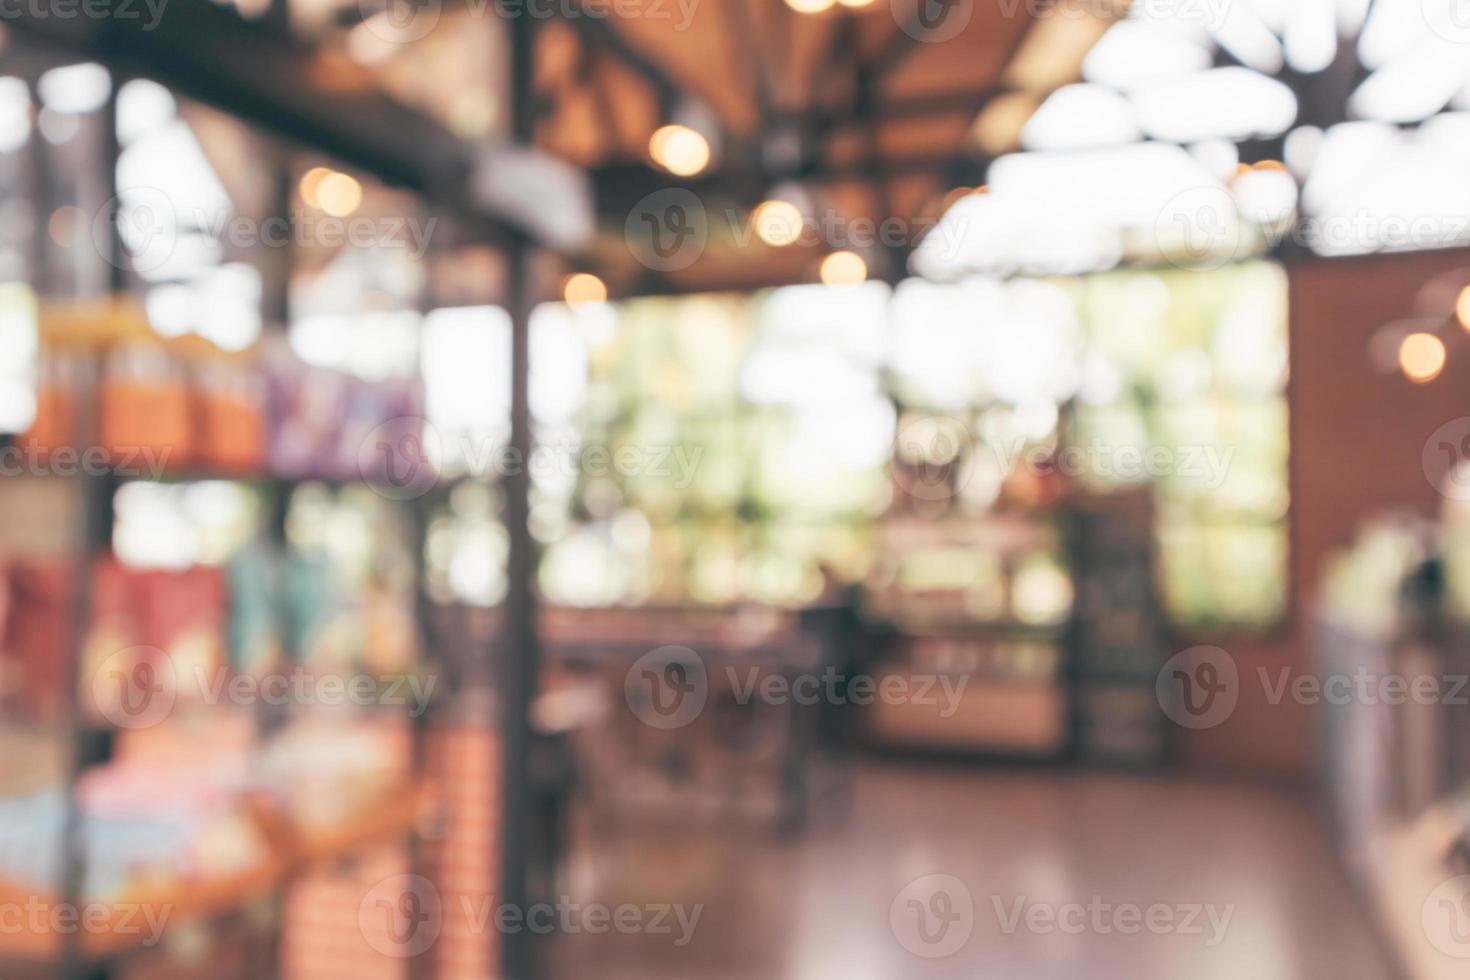 Cafe coffee shop interior abstract blur defocused with bokeh light background photo